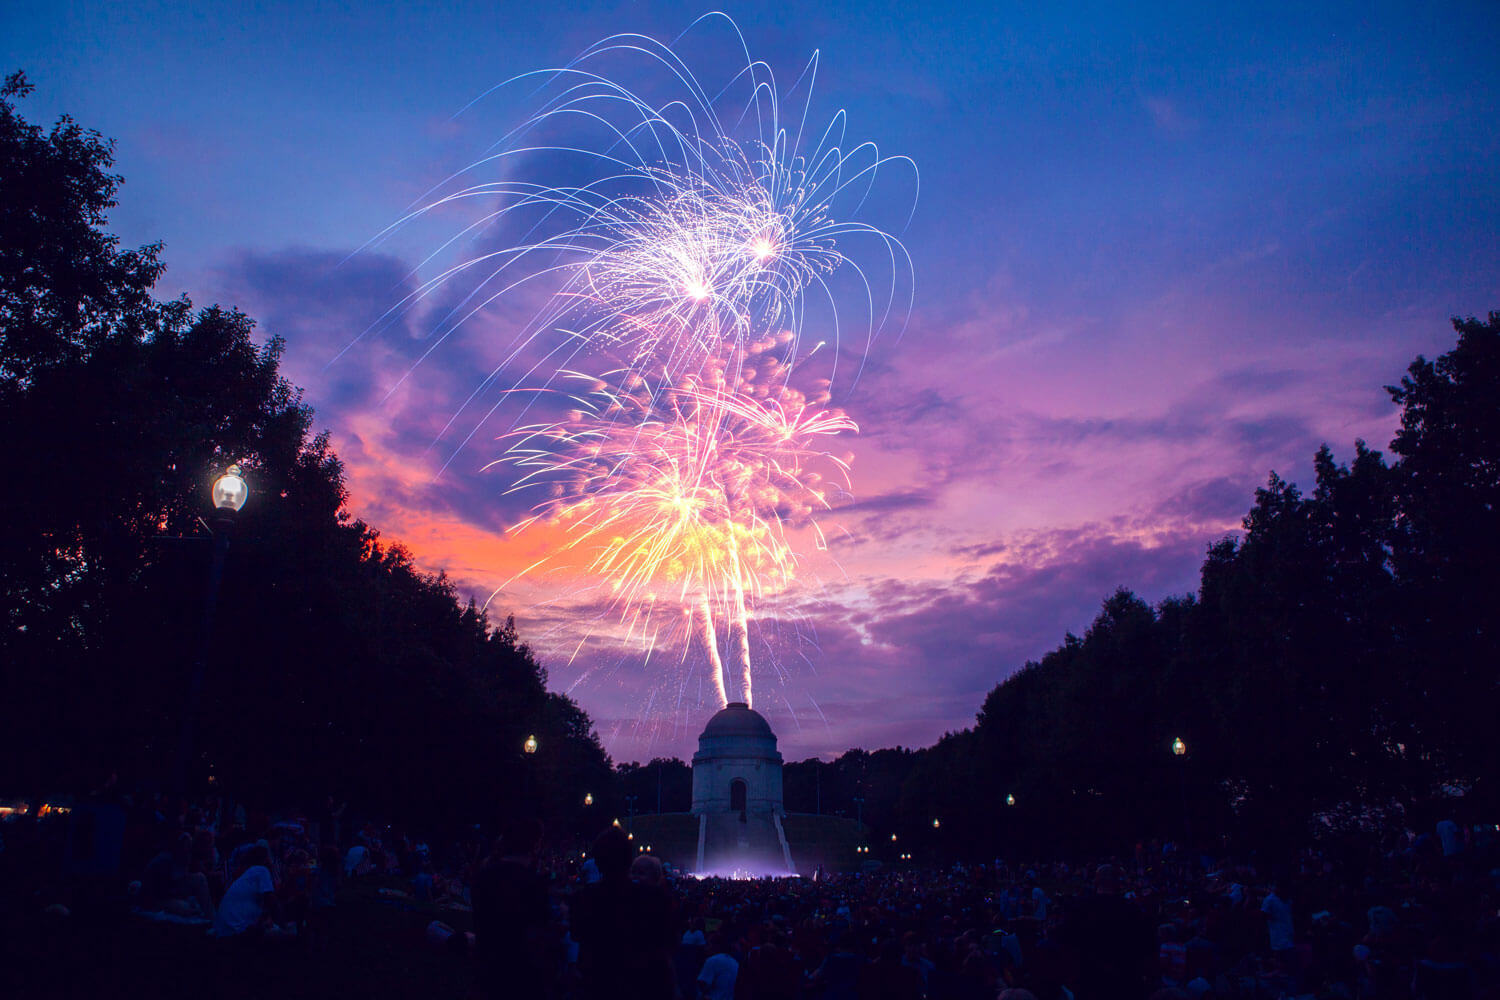 Fireworks light up the night sky in Ohio with a crowd of people watching